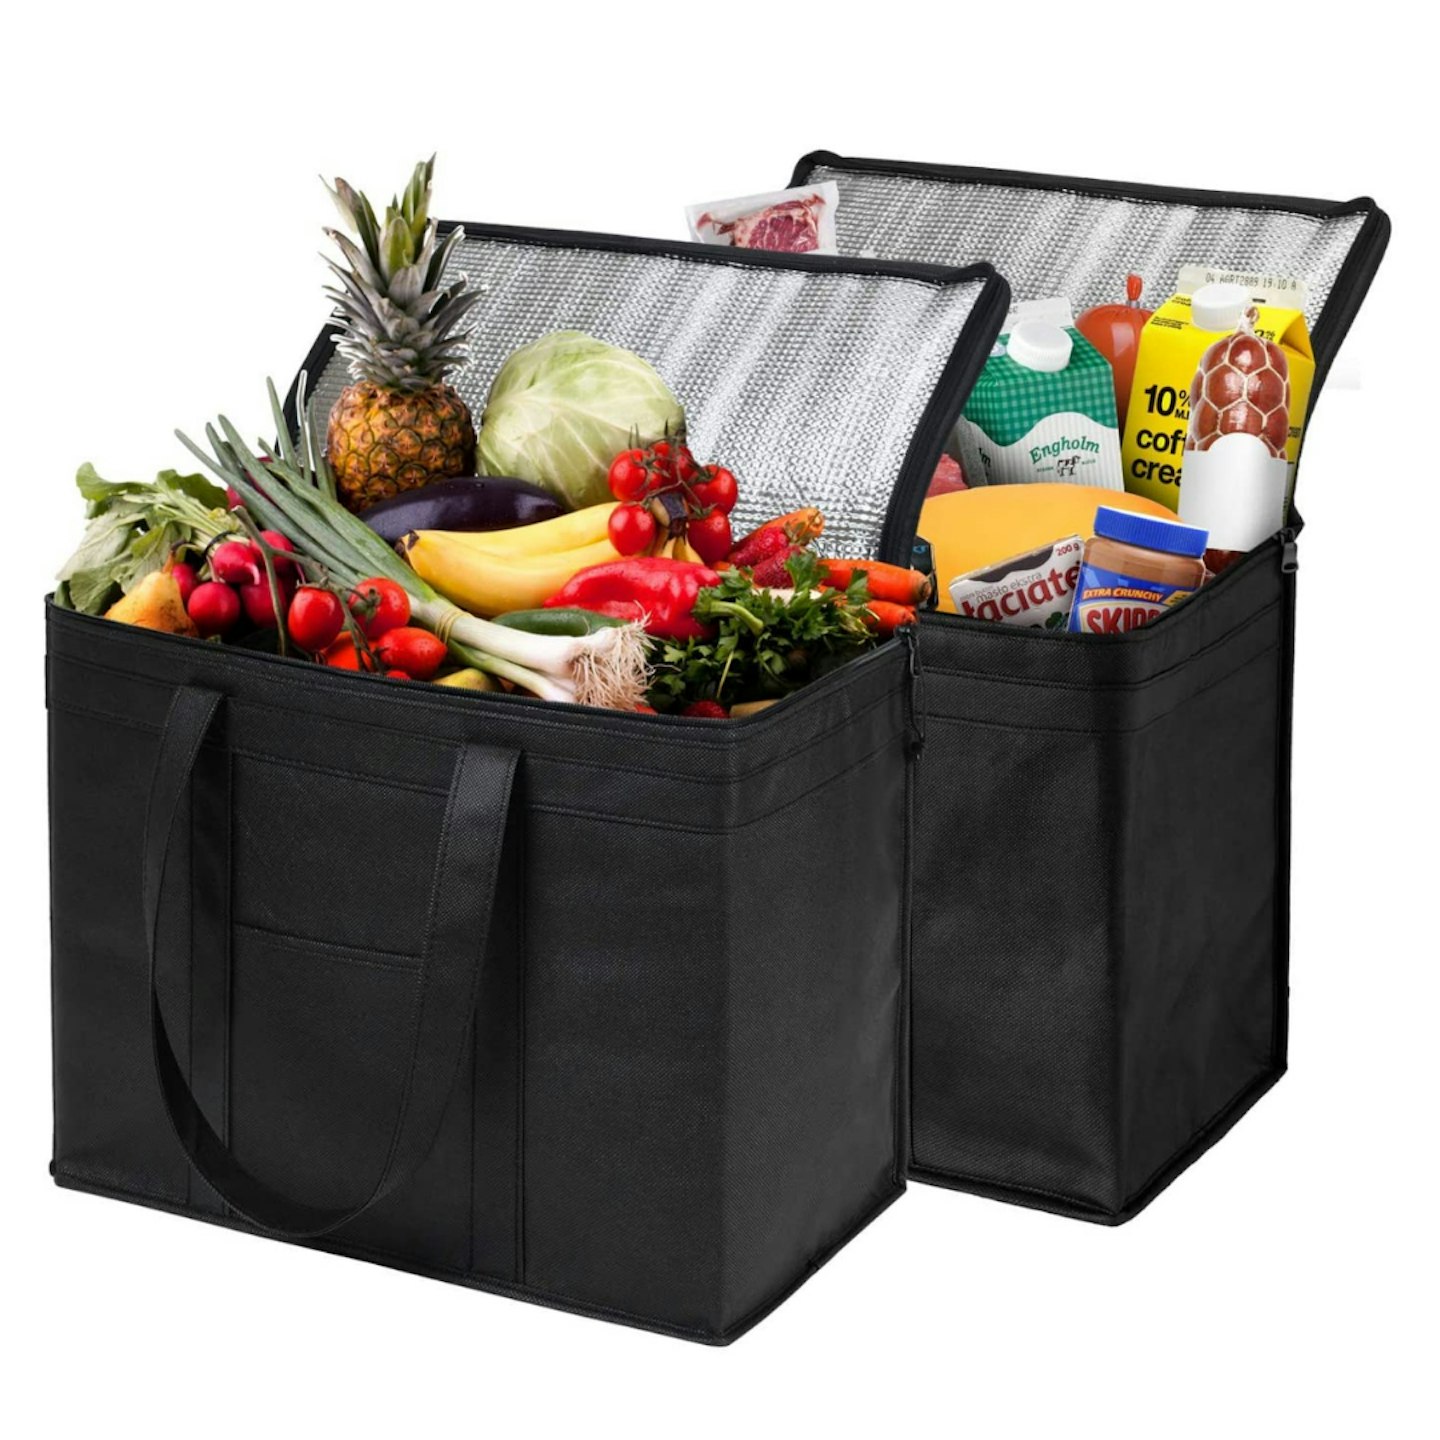 NZ Home XL Insulated Reusable Grocery Shopping Bags